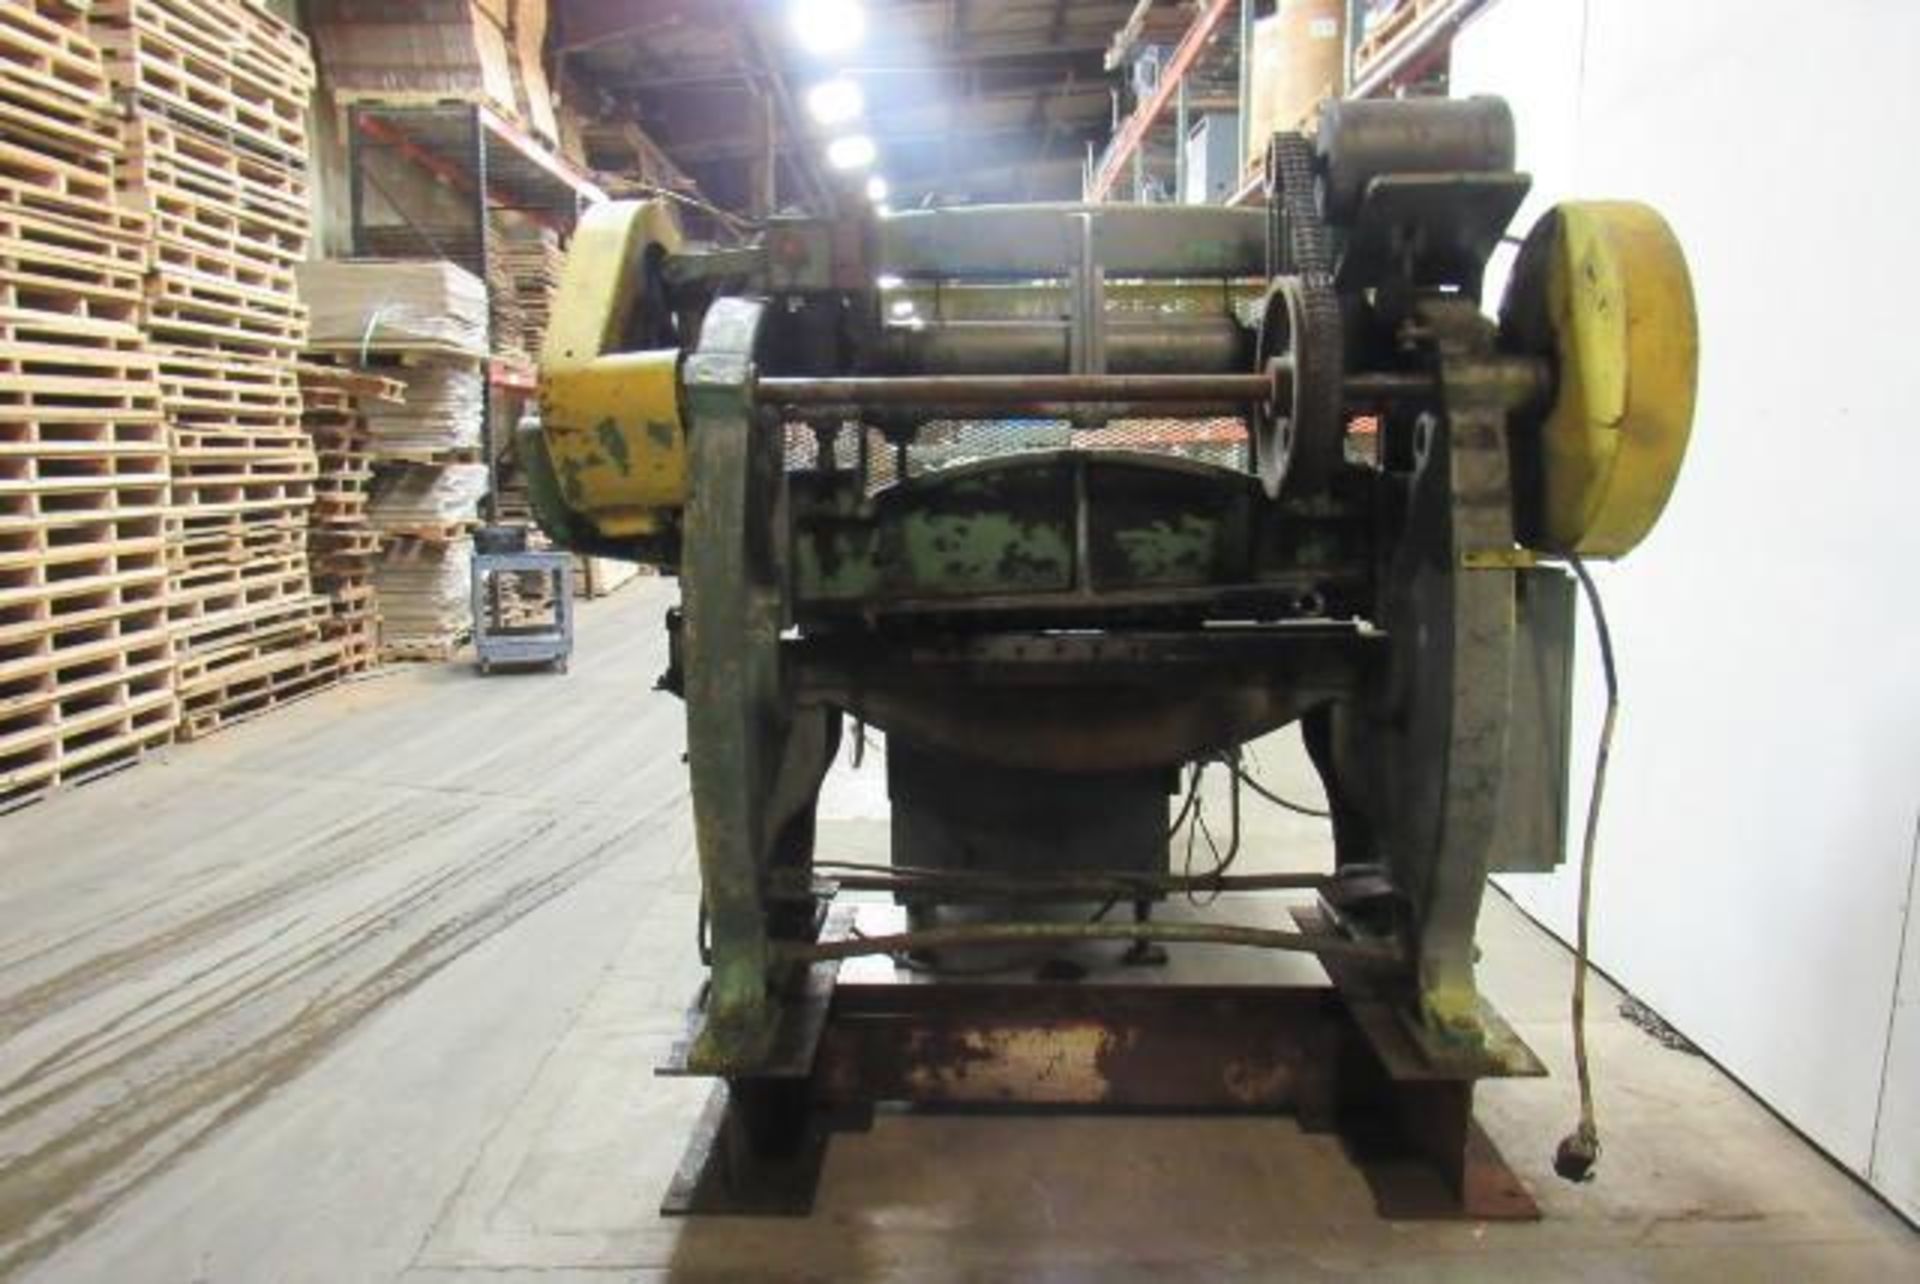 48" x 1/8" Morgan Rushworth automatic power feed cut to length line shear. - Image 11 of 11